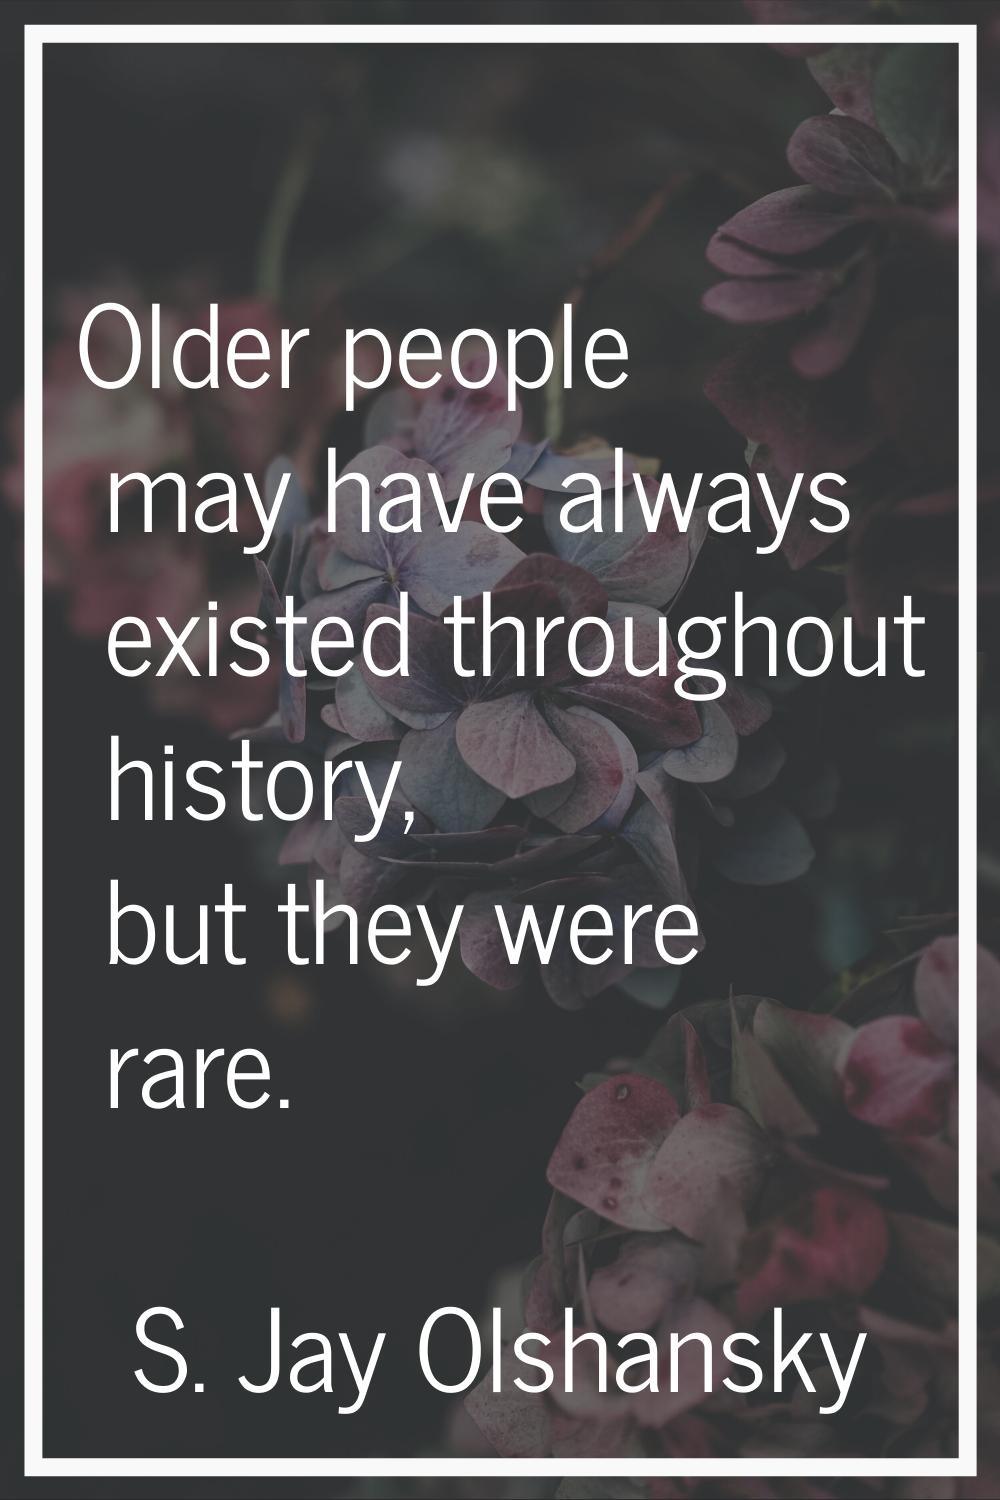 Older people may have always existed throughout history, but they were rare.